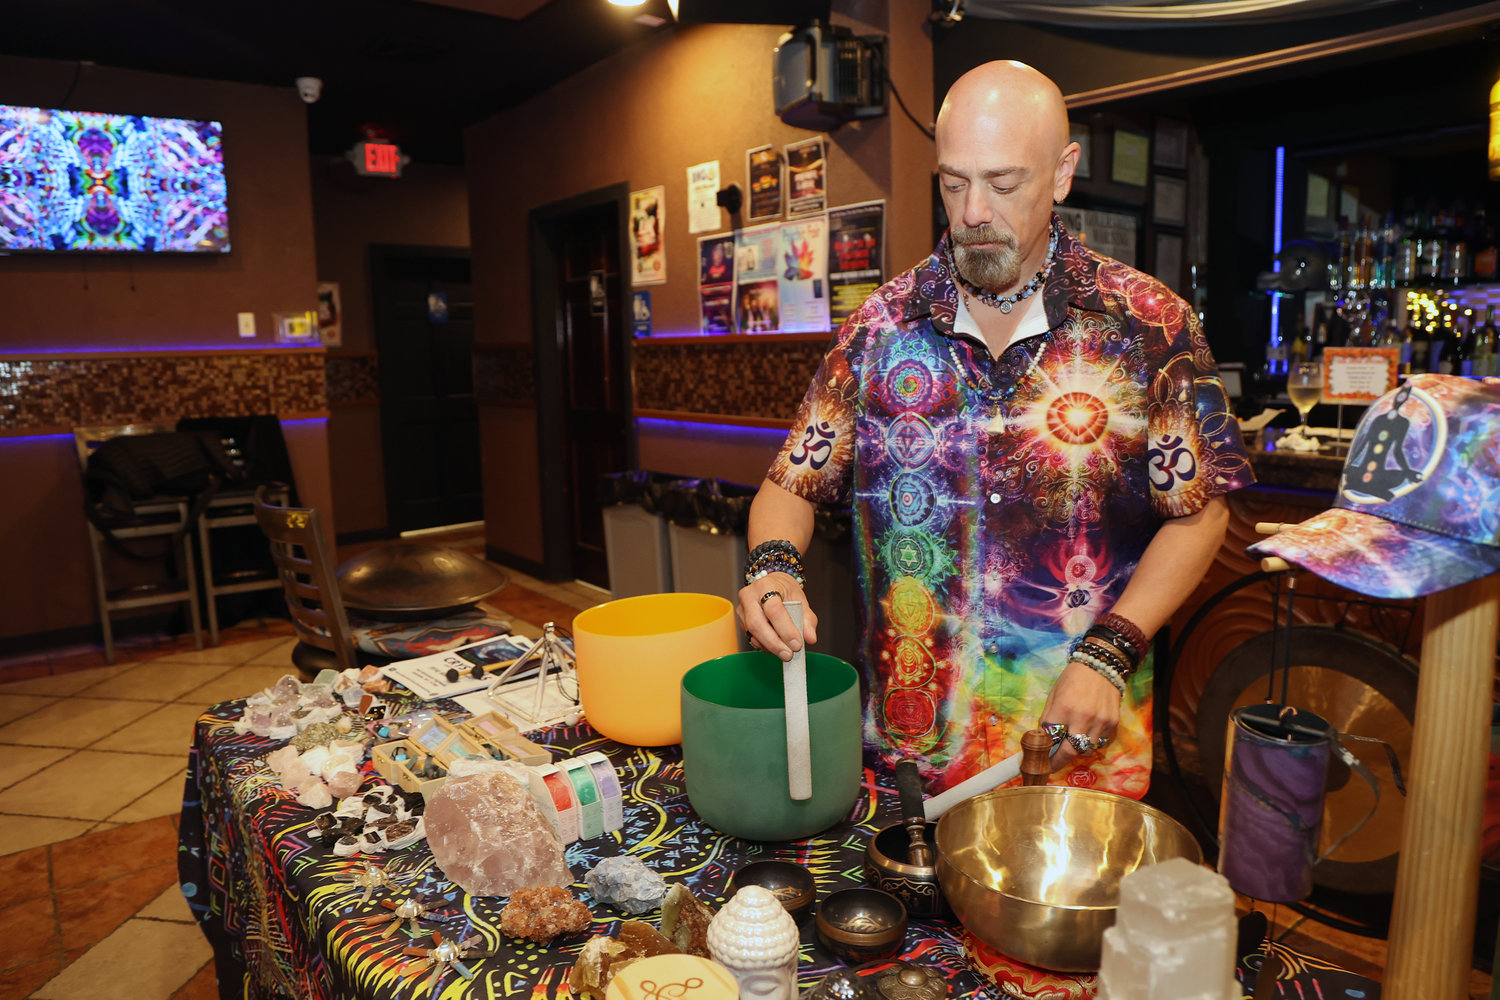 Kenny Cowie played a set of standing bells at G’s nightclub on Saturday. The event space held a psychic fair throughout the day. Cowie’s shirt denoted his belief in chakra meditation.